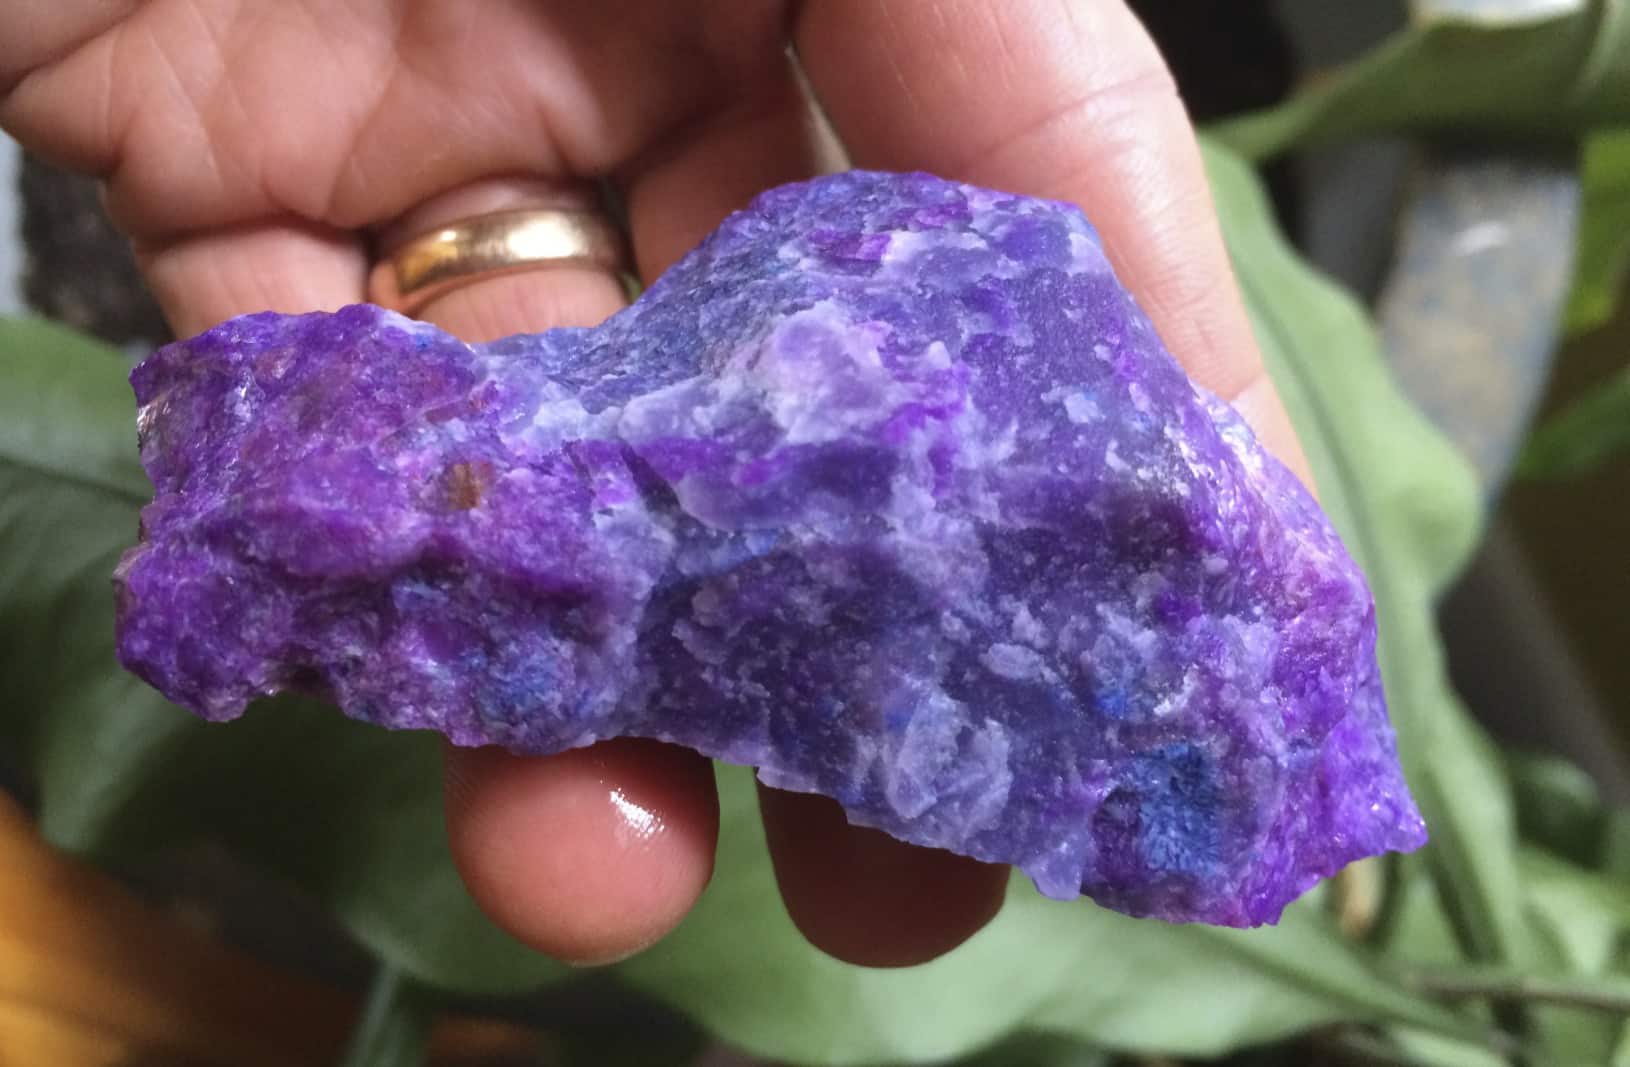 wet Sugilite - 'the other purple stone' - symbolizes the concretization of Spiritual vision